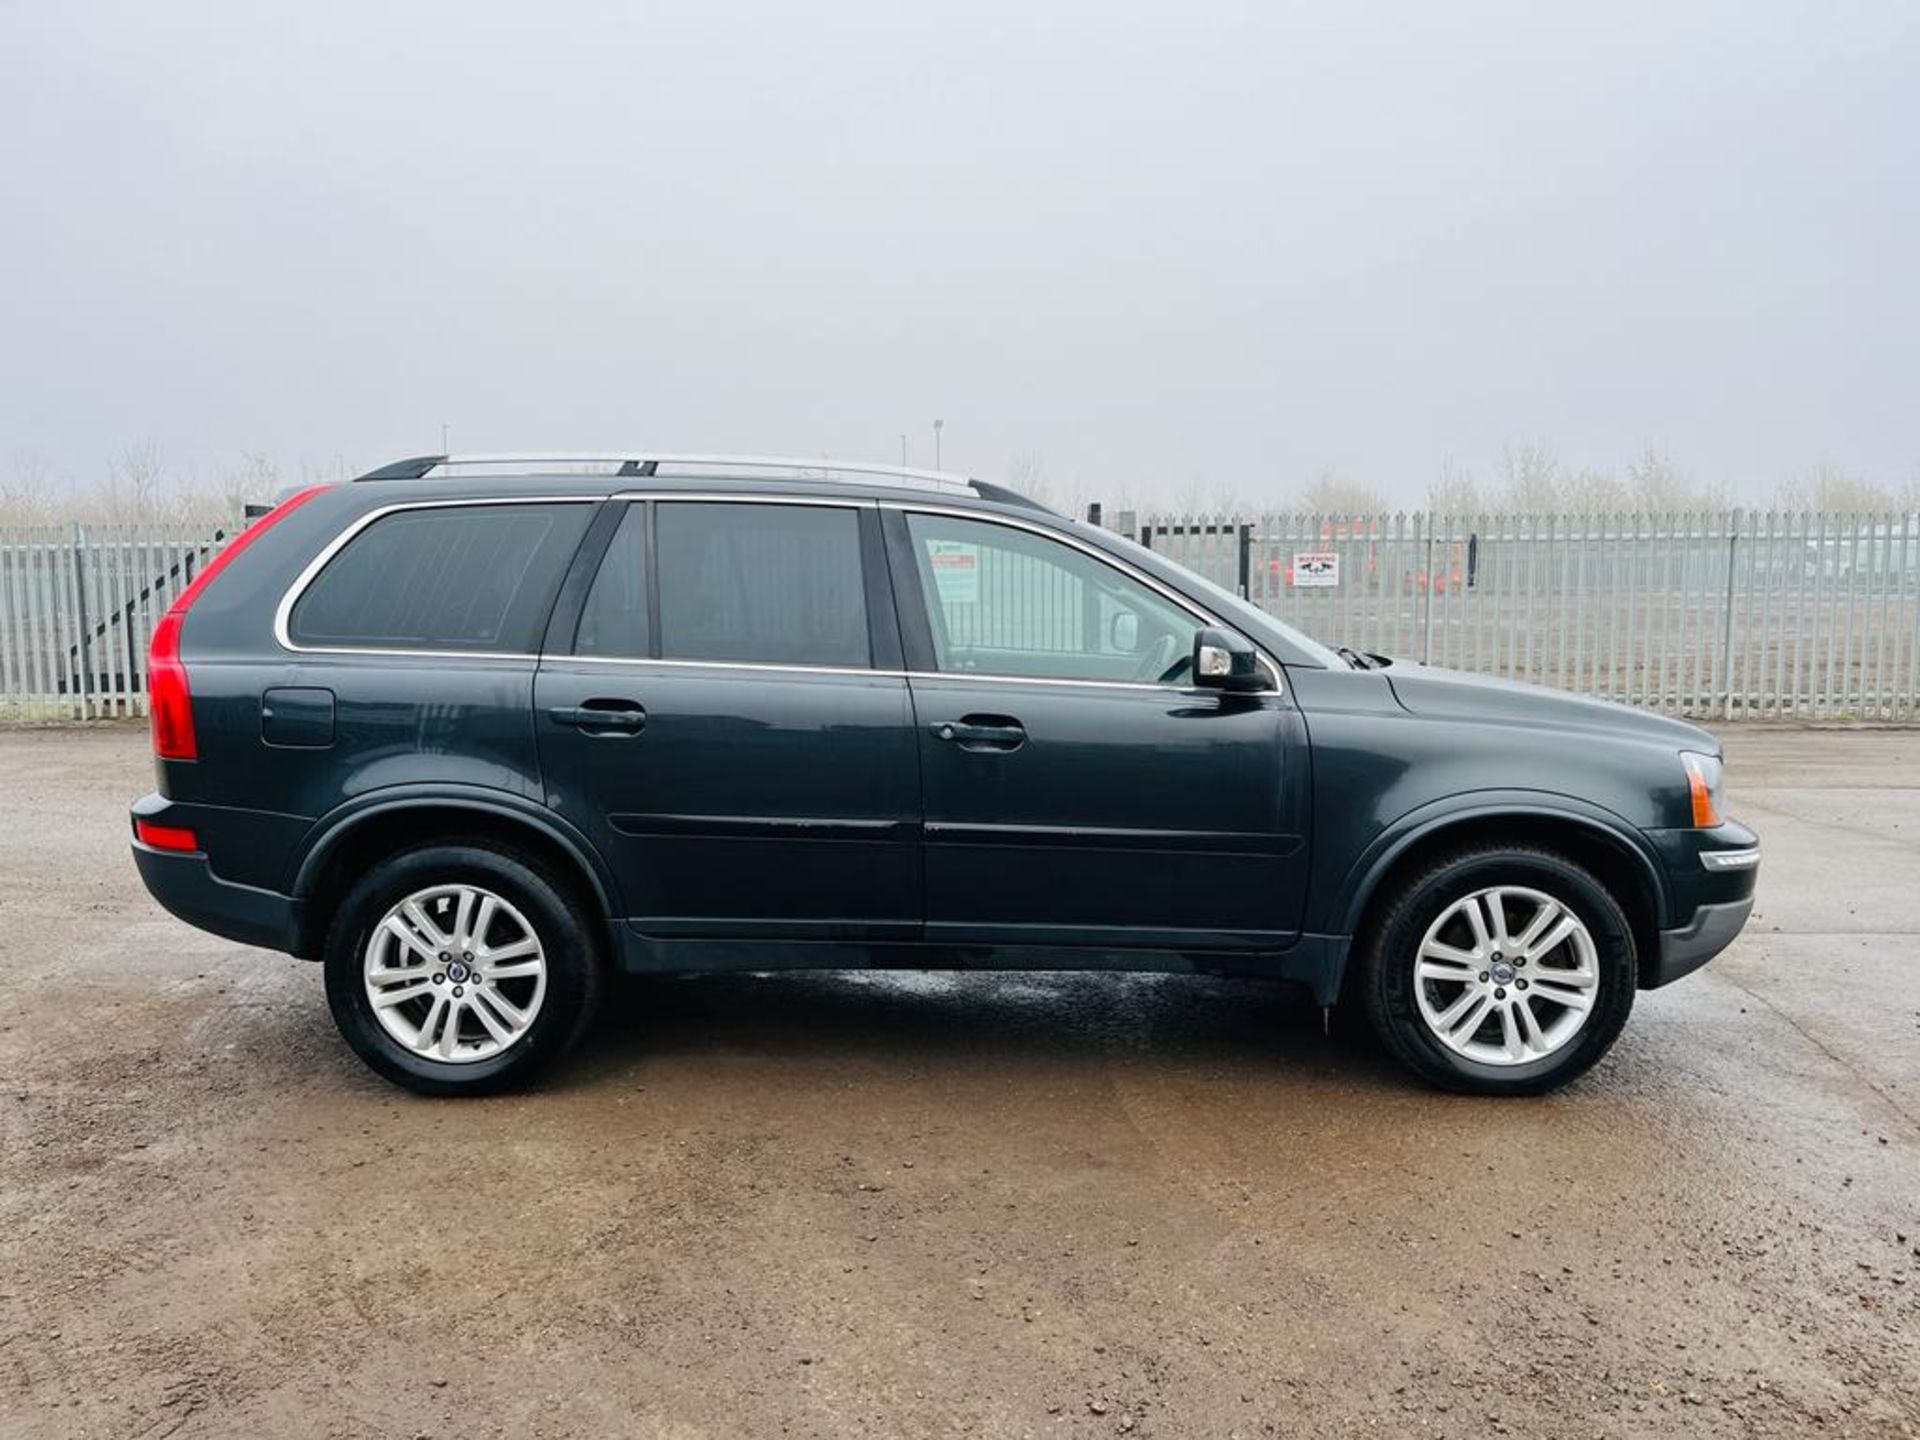 Volvo XC90 2.4 D5 200 SE G/T 4WD 2011 '11 Reg' A/C - No Vat - Ony 121,773 Miles - Image 11 of 35